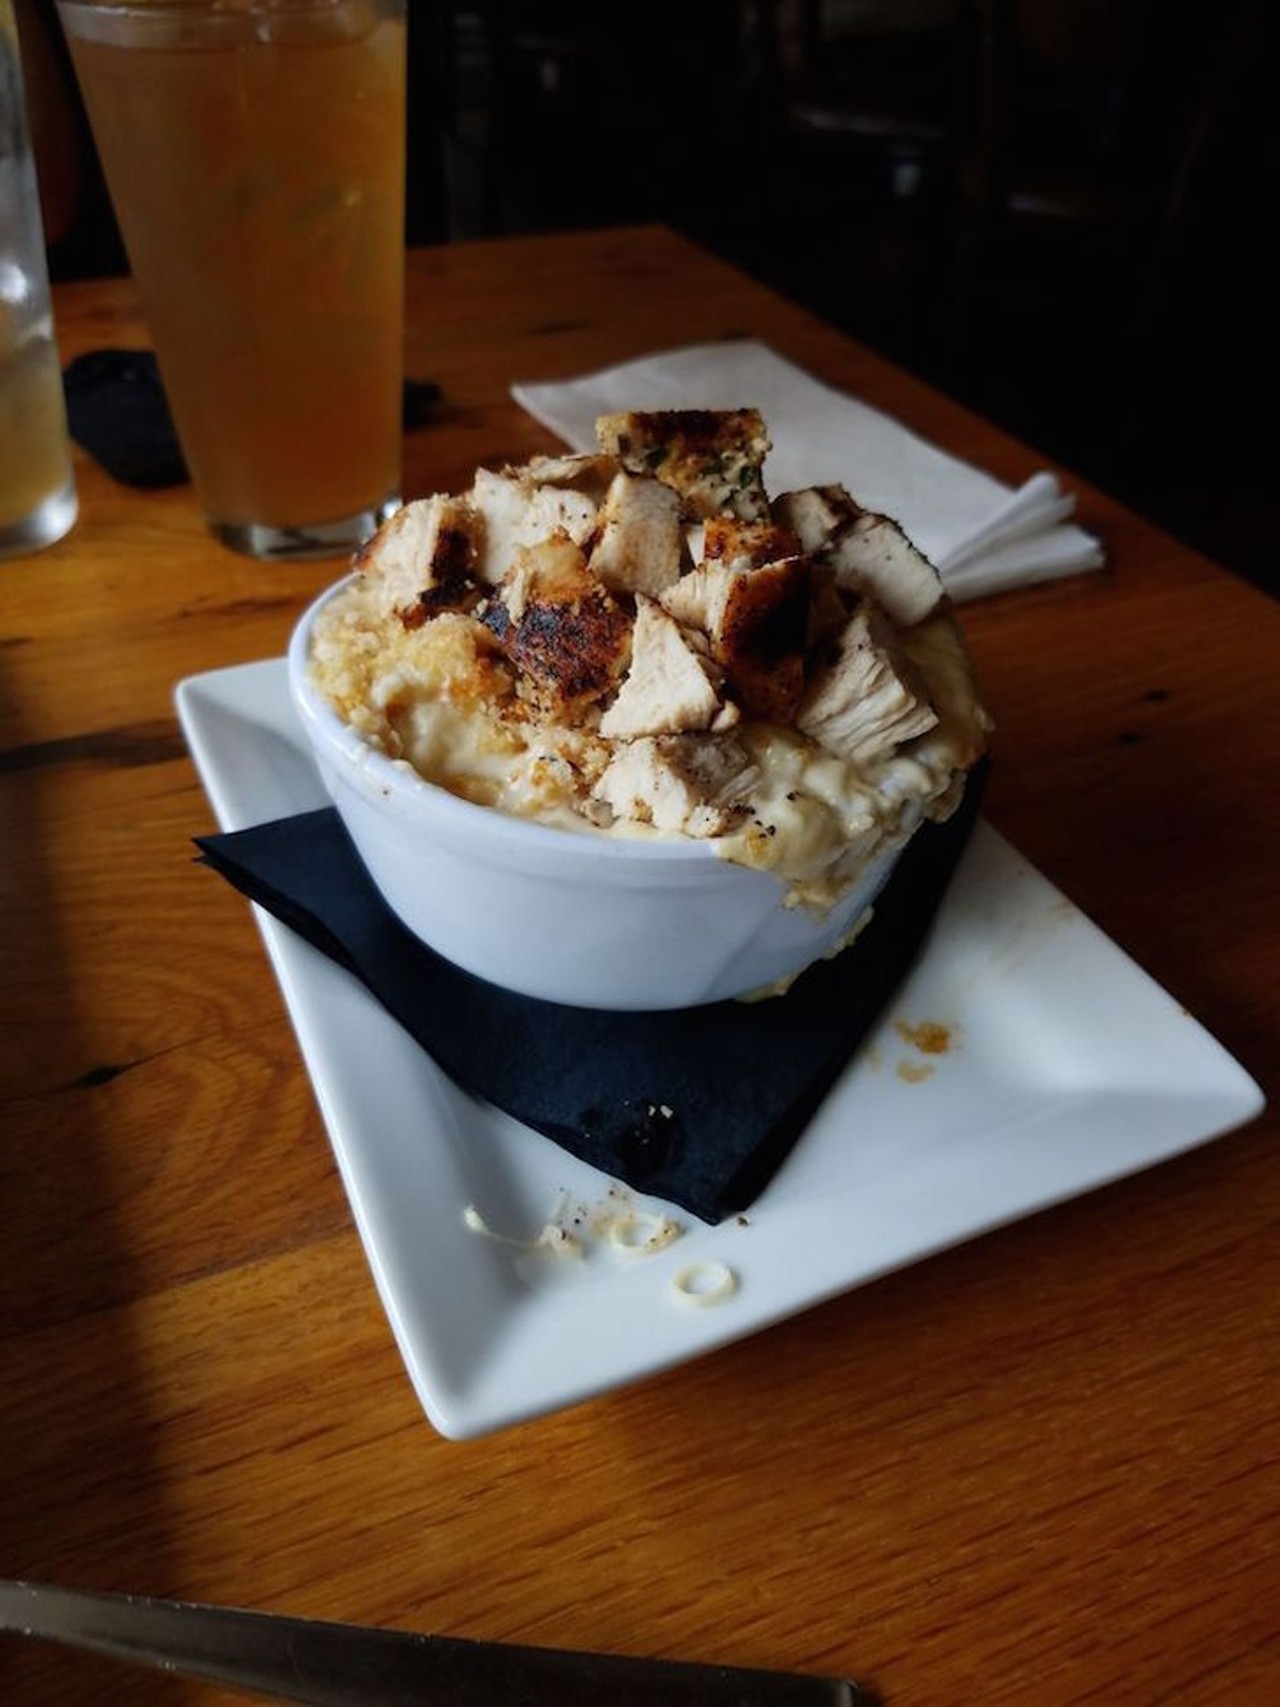 Crooked Spoon Gastropub
200 Citrus Tower Blvd., Clermont
Six-cheese mac & cheese with chicken
Photo via Megan K. on Yelp